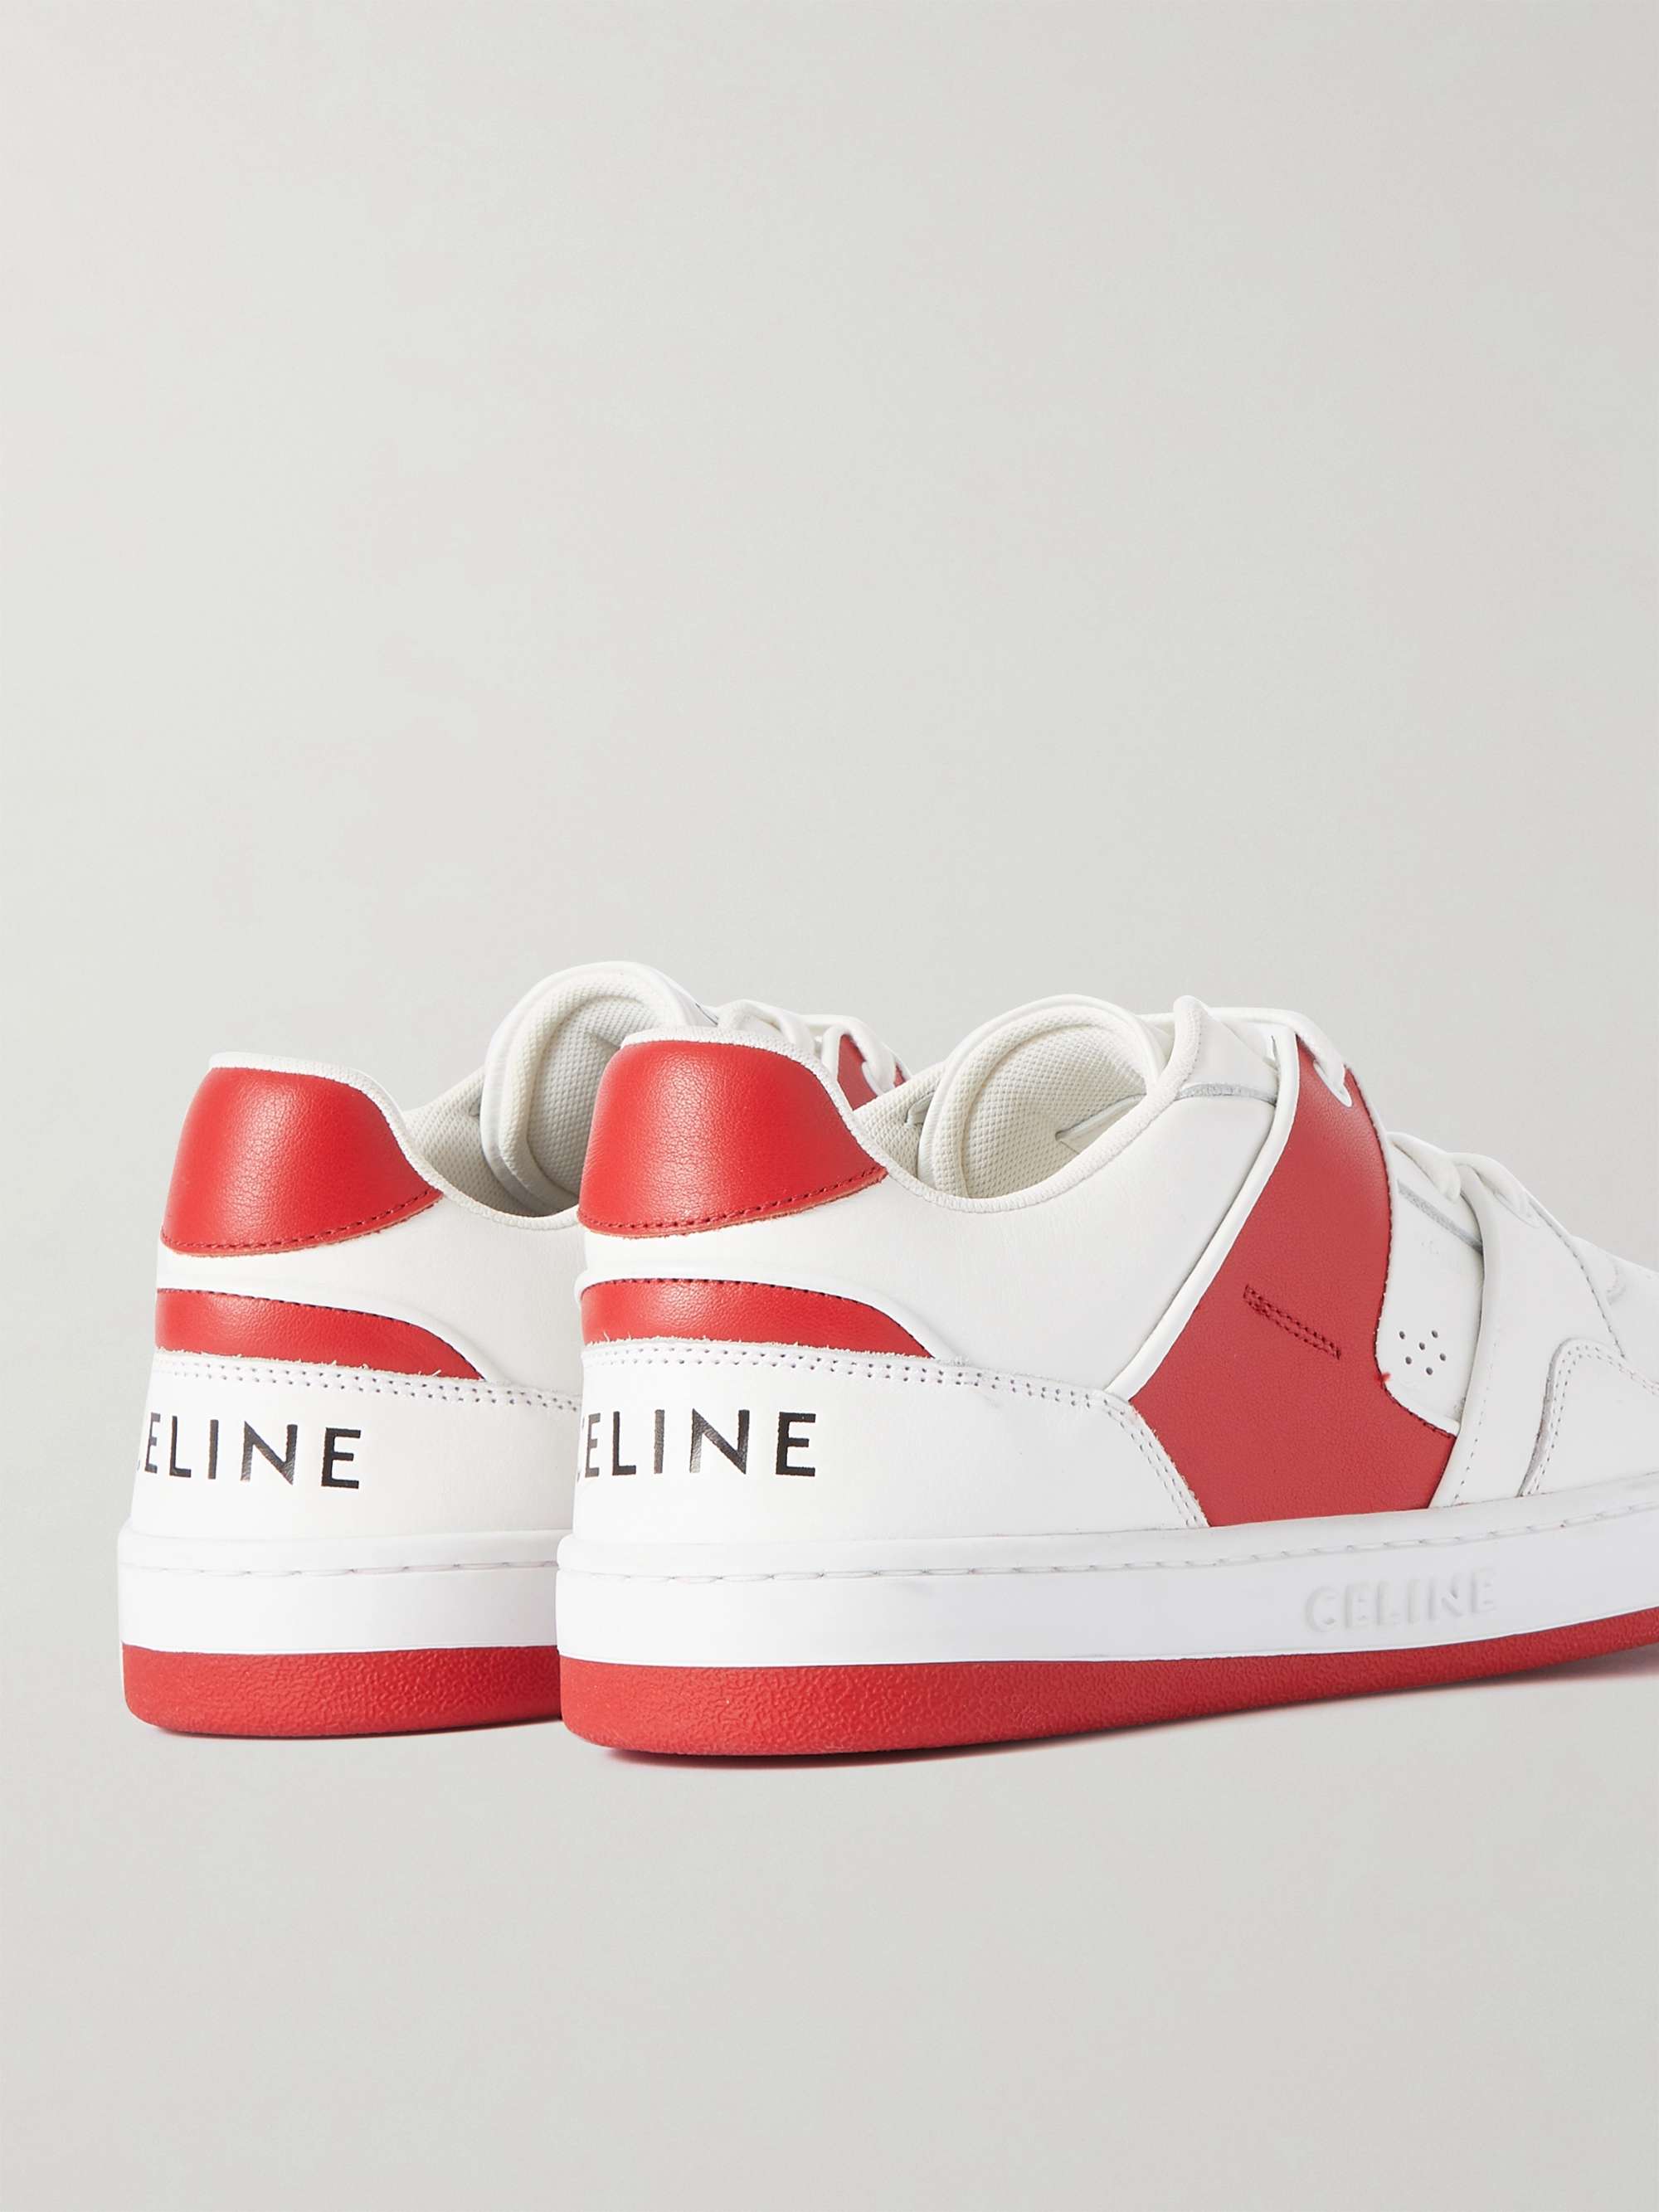 CELINE Two-Tone Leather Sneakers